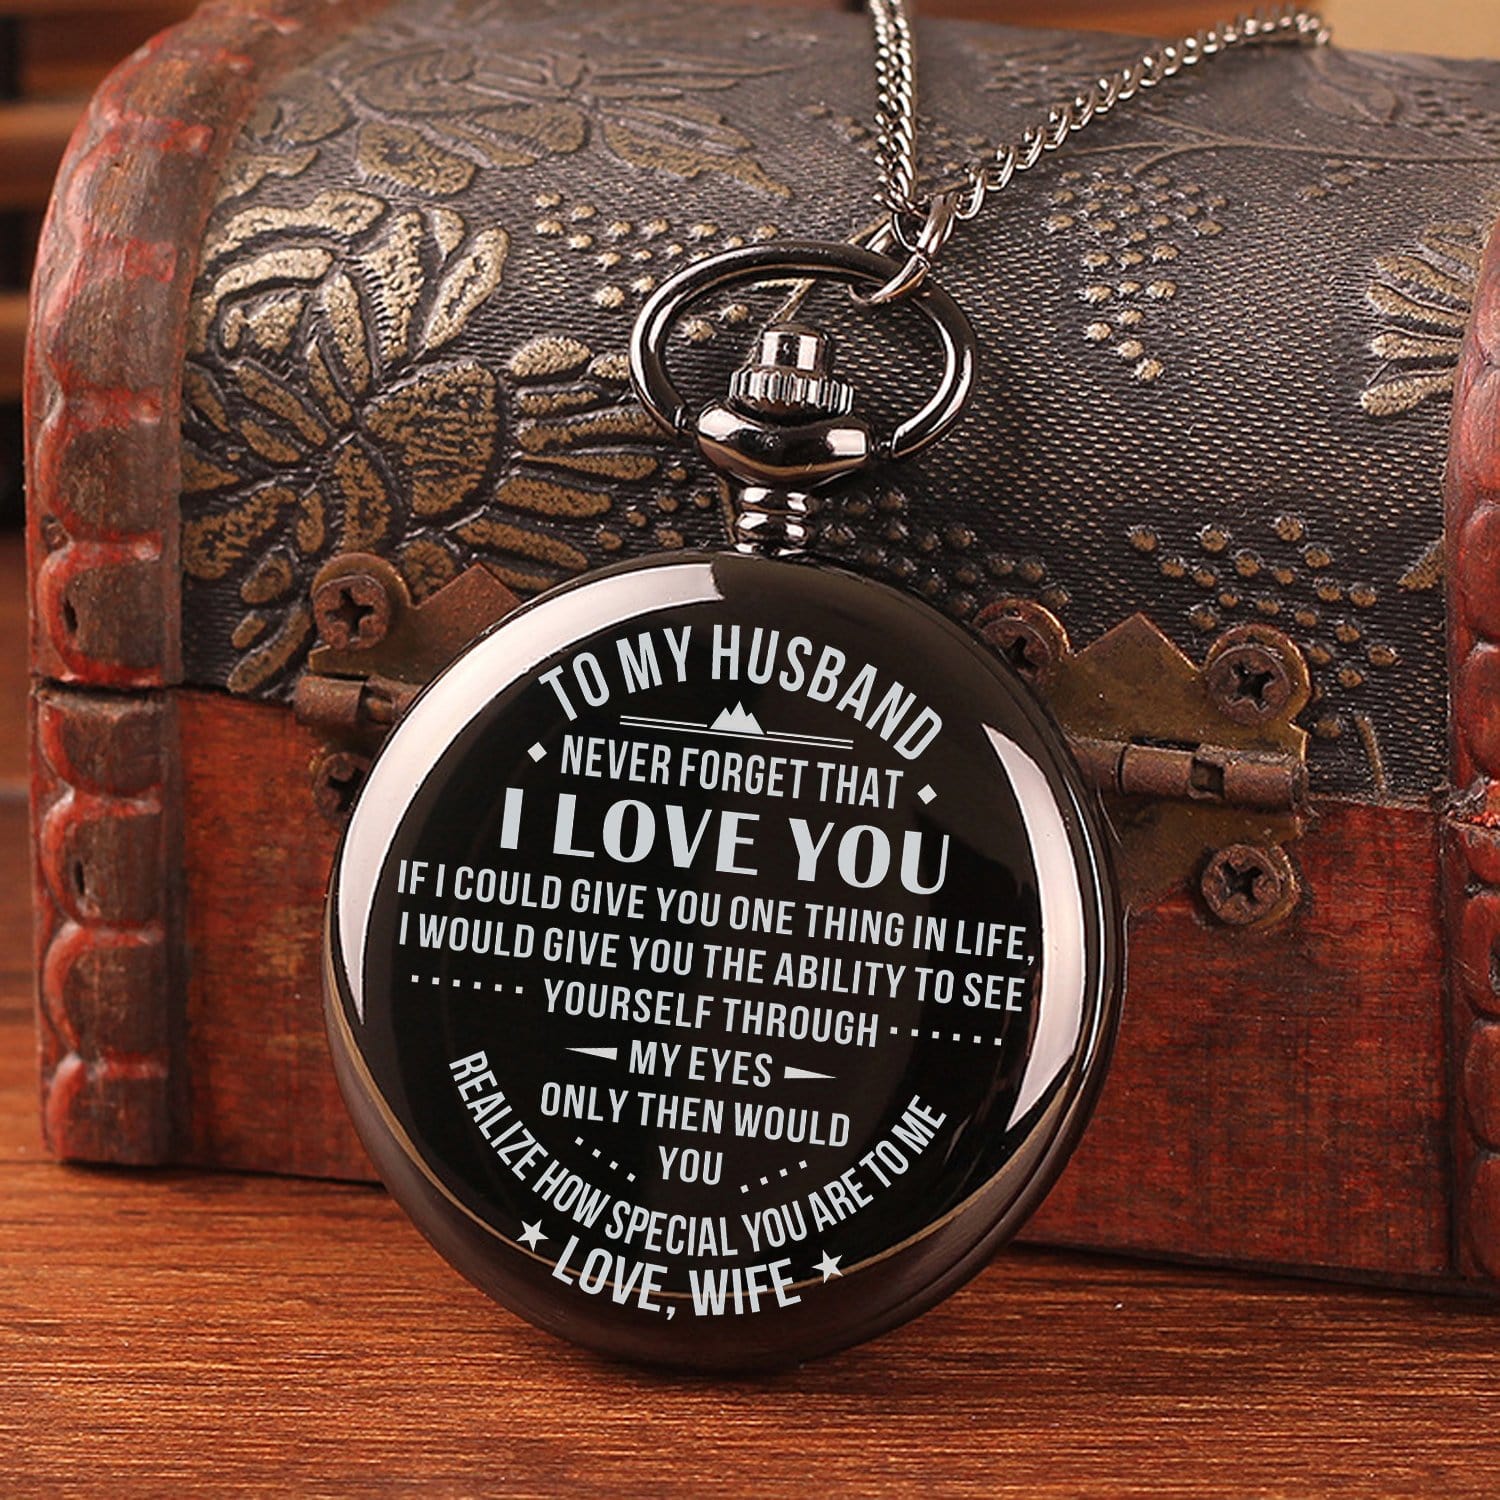 Pocket Watches For Husband To My Husband - You Realize How Special You Are To Me Pocket Watch GiveMe-Gifts